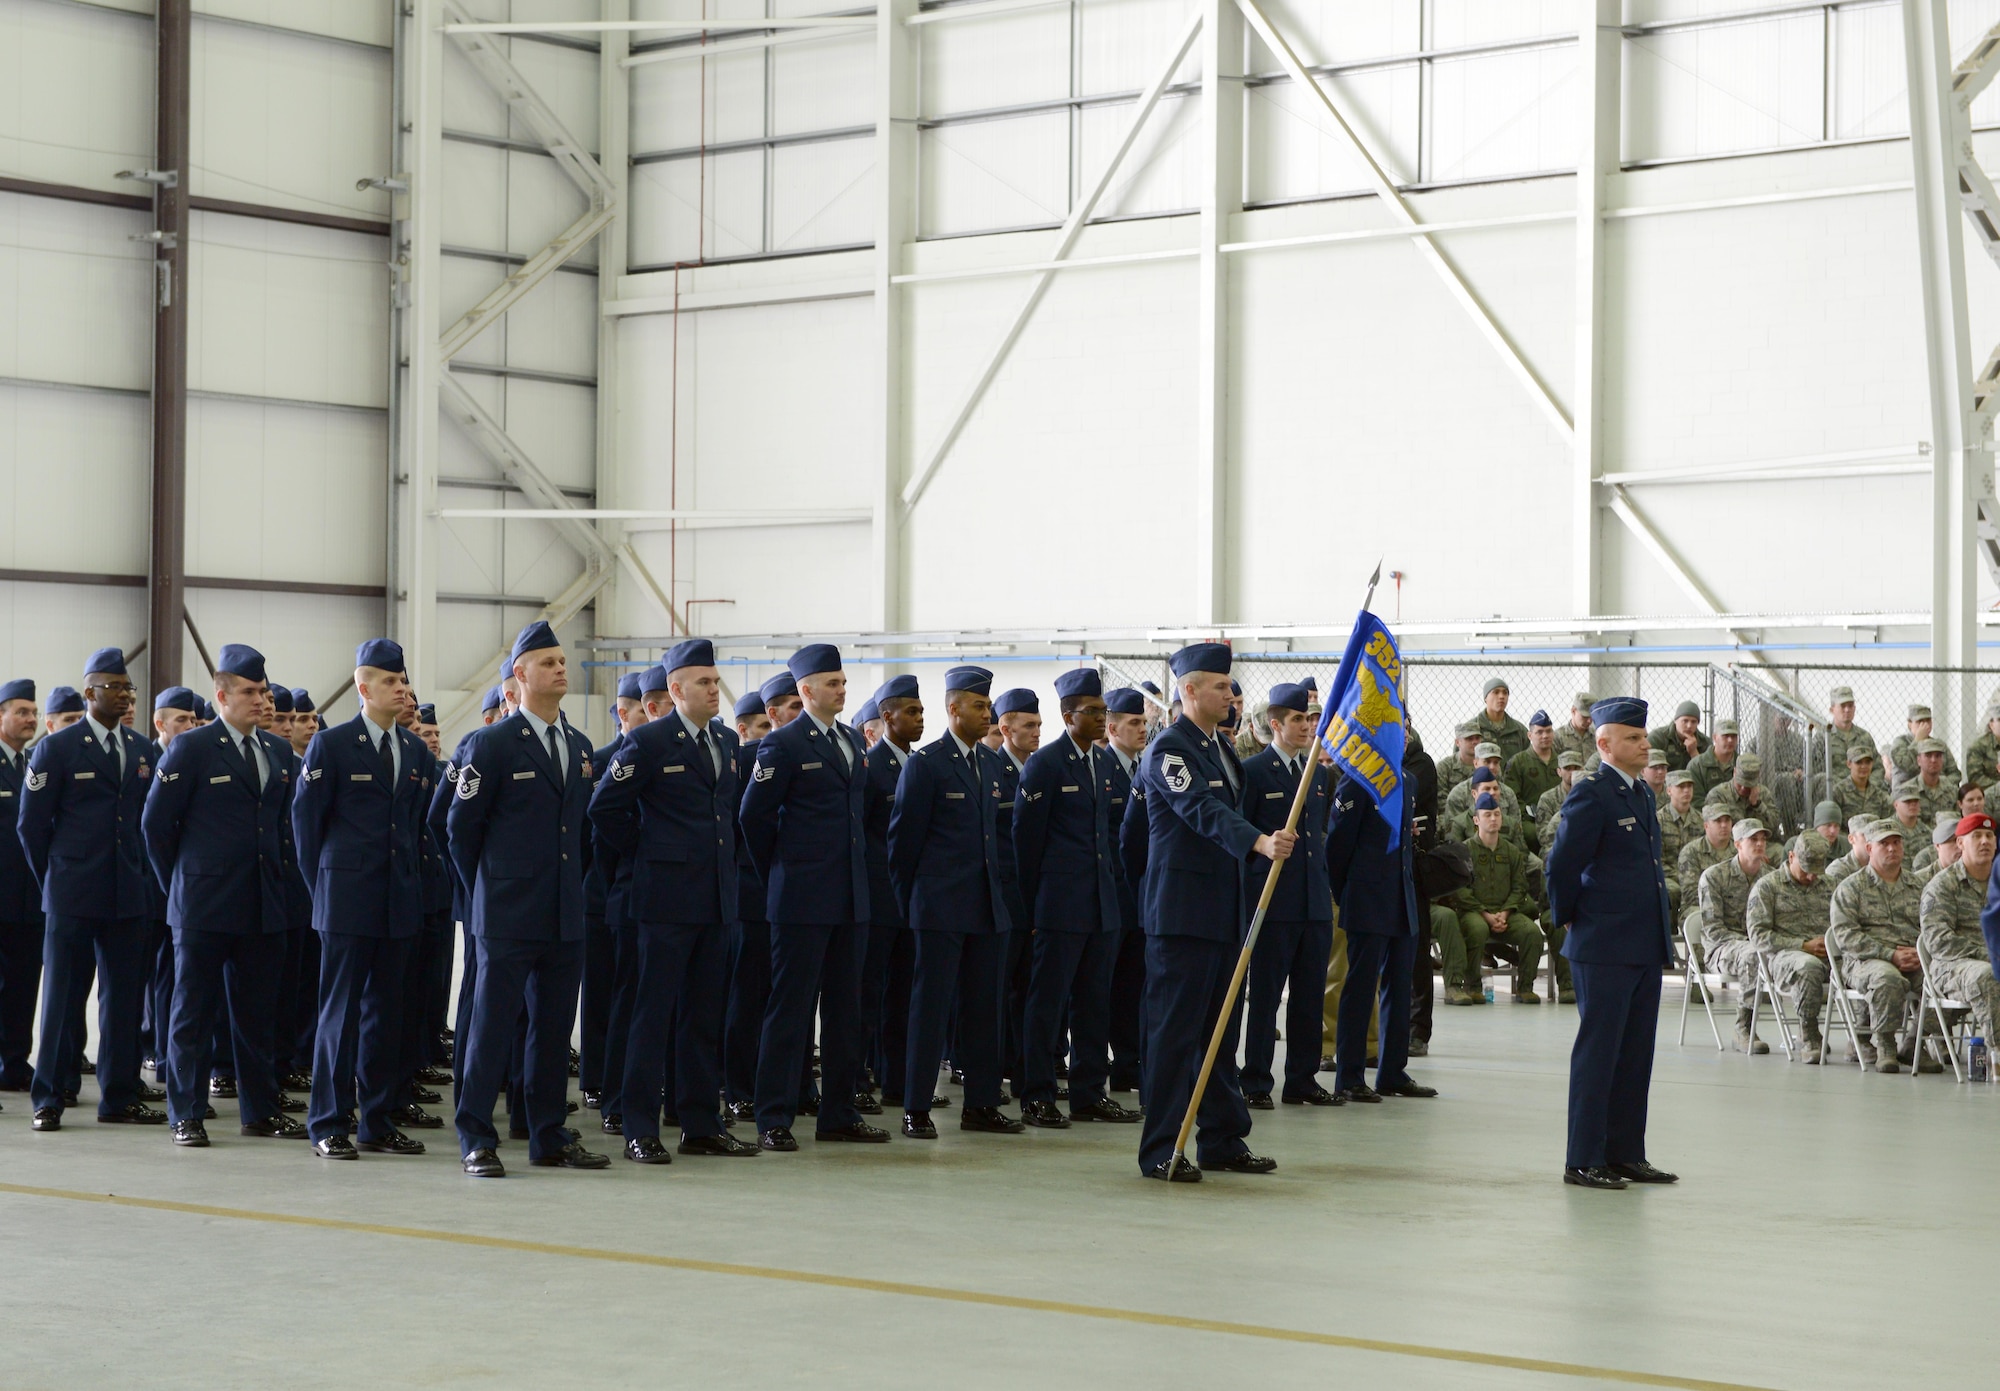 The 352nd Special Operations Maintenance Group formation stands at parade rest while U.S. Air Force Col. Eric V. Faison, 352nd SOMXG commander, gives remarks following the activation of the new maintenance group March 23, 2015, in Hangar 814 on RAF Mildenhall, England. (U.S Air Force photo by Tech. Sgt. Stacia Zachary/Released) 